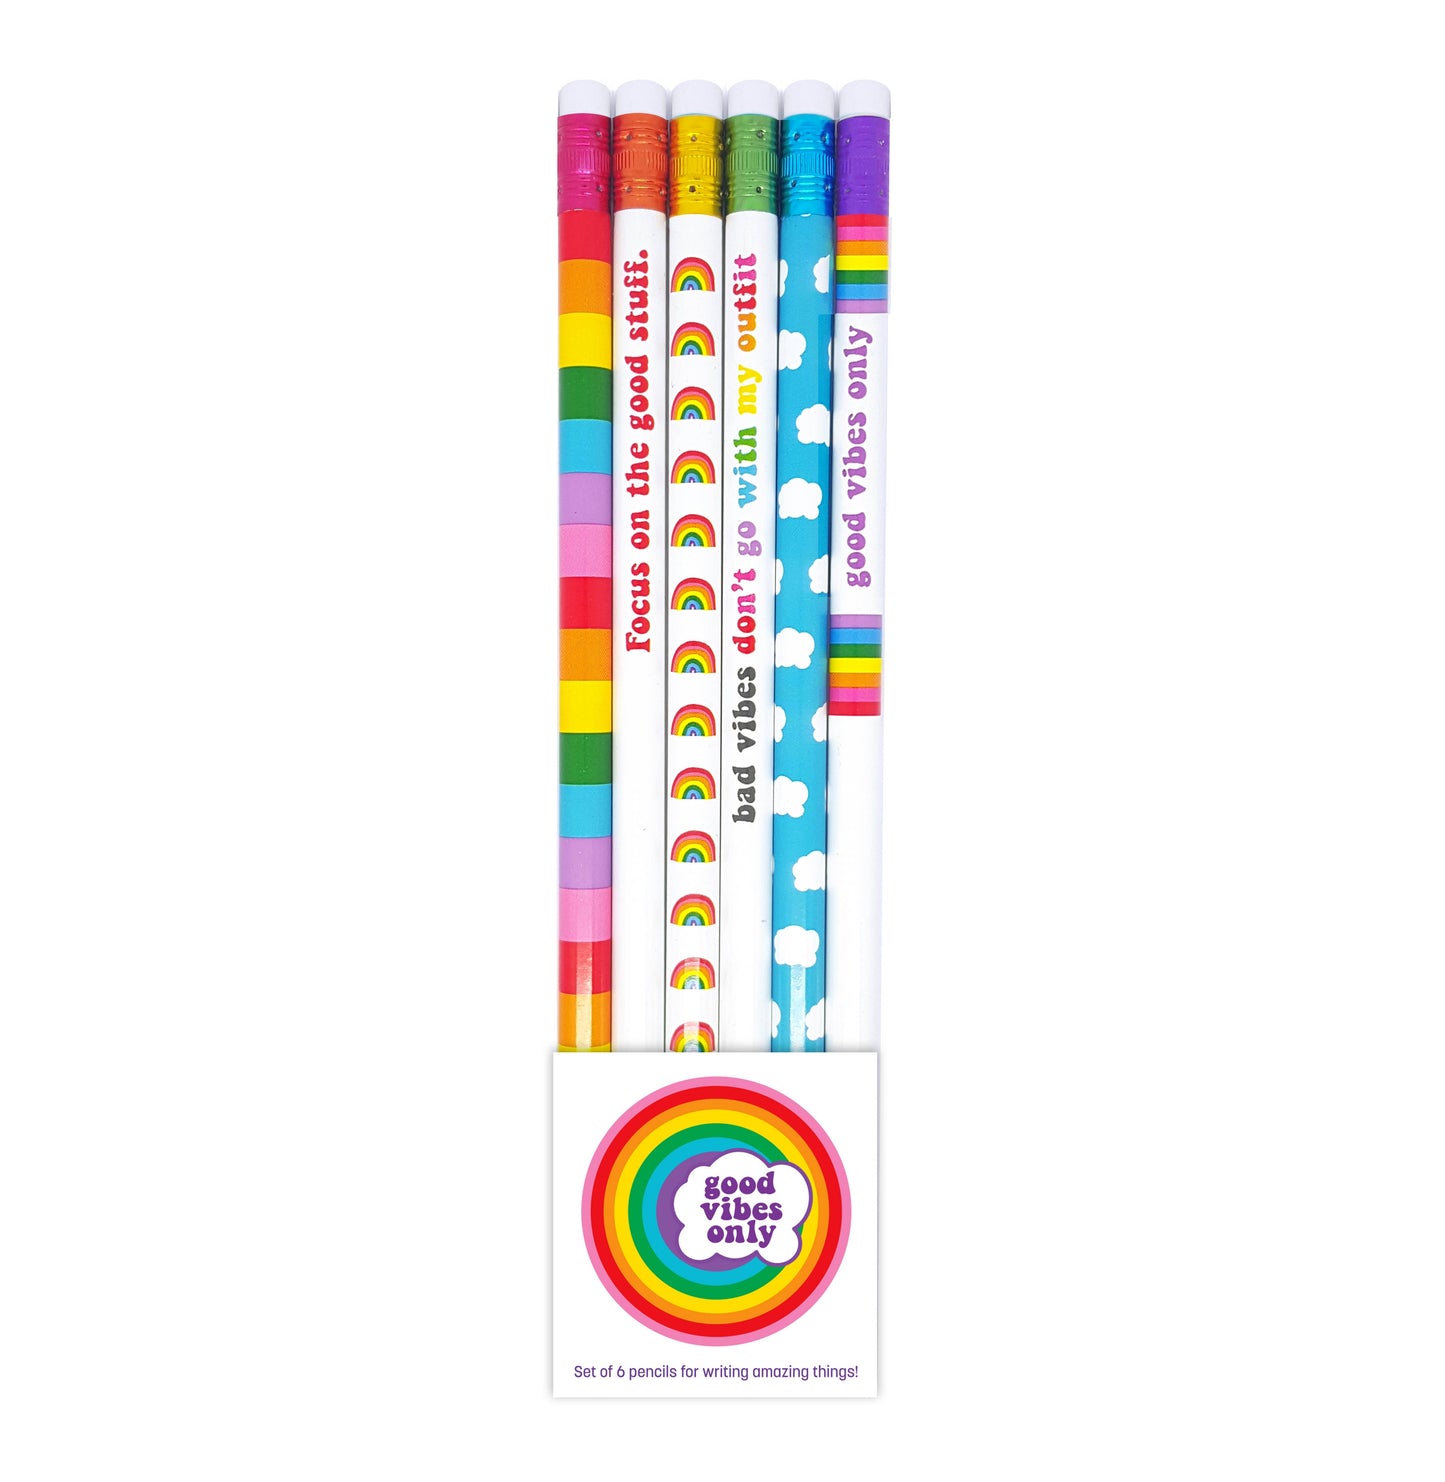 Good Vibes Only Pencil Set